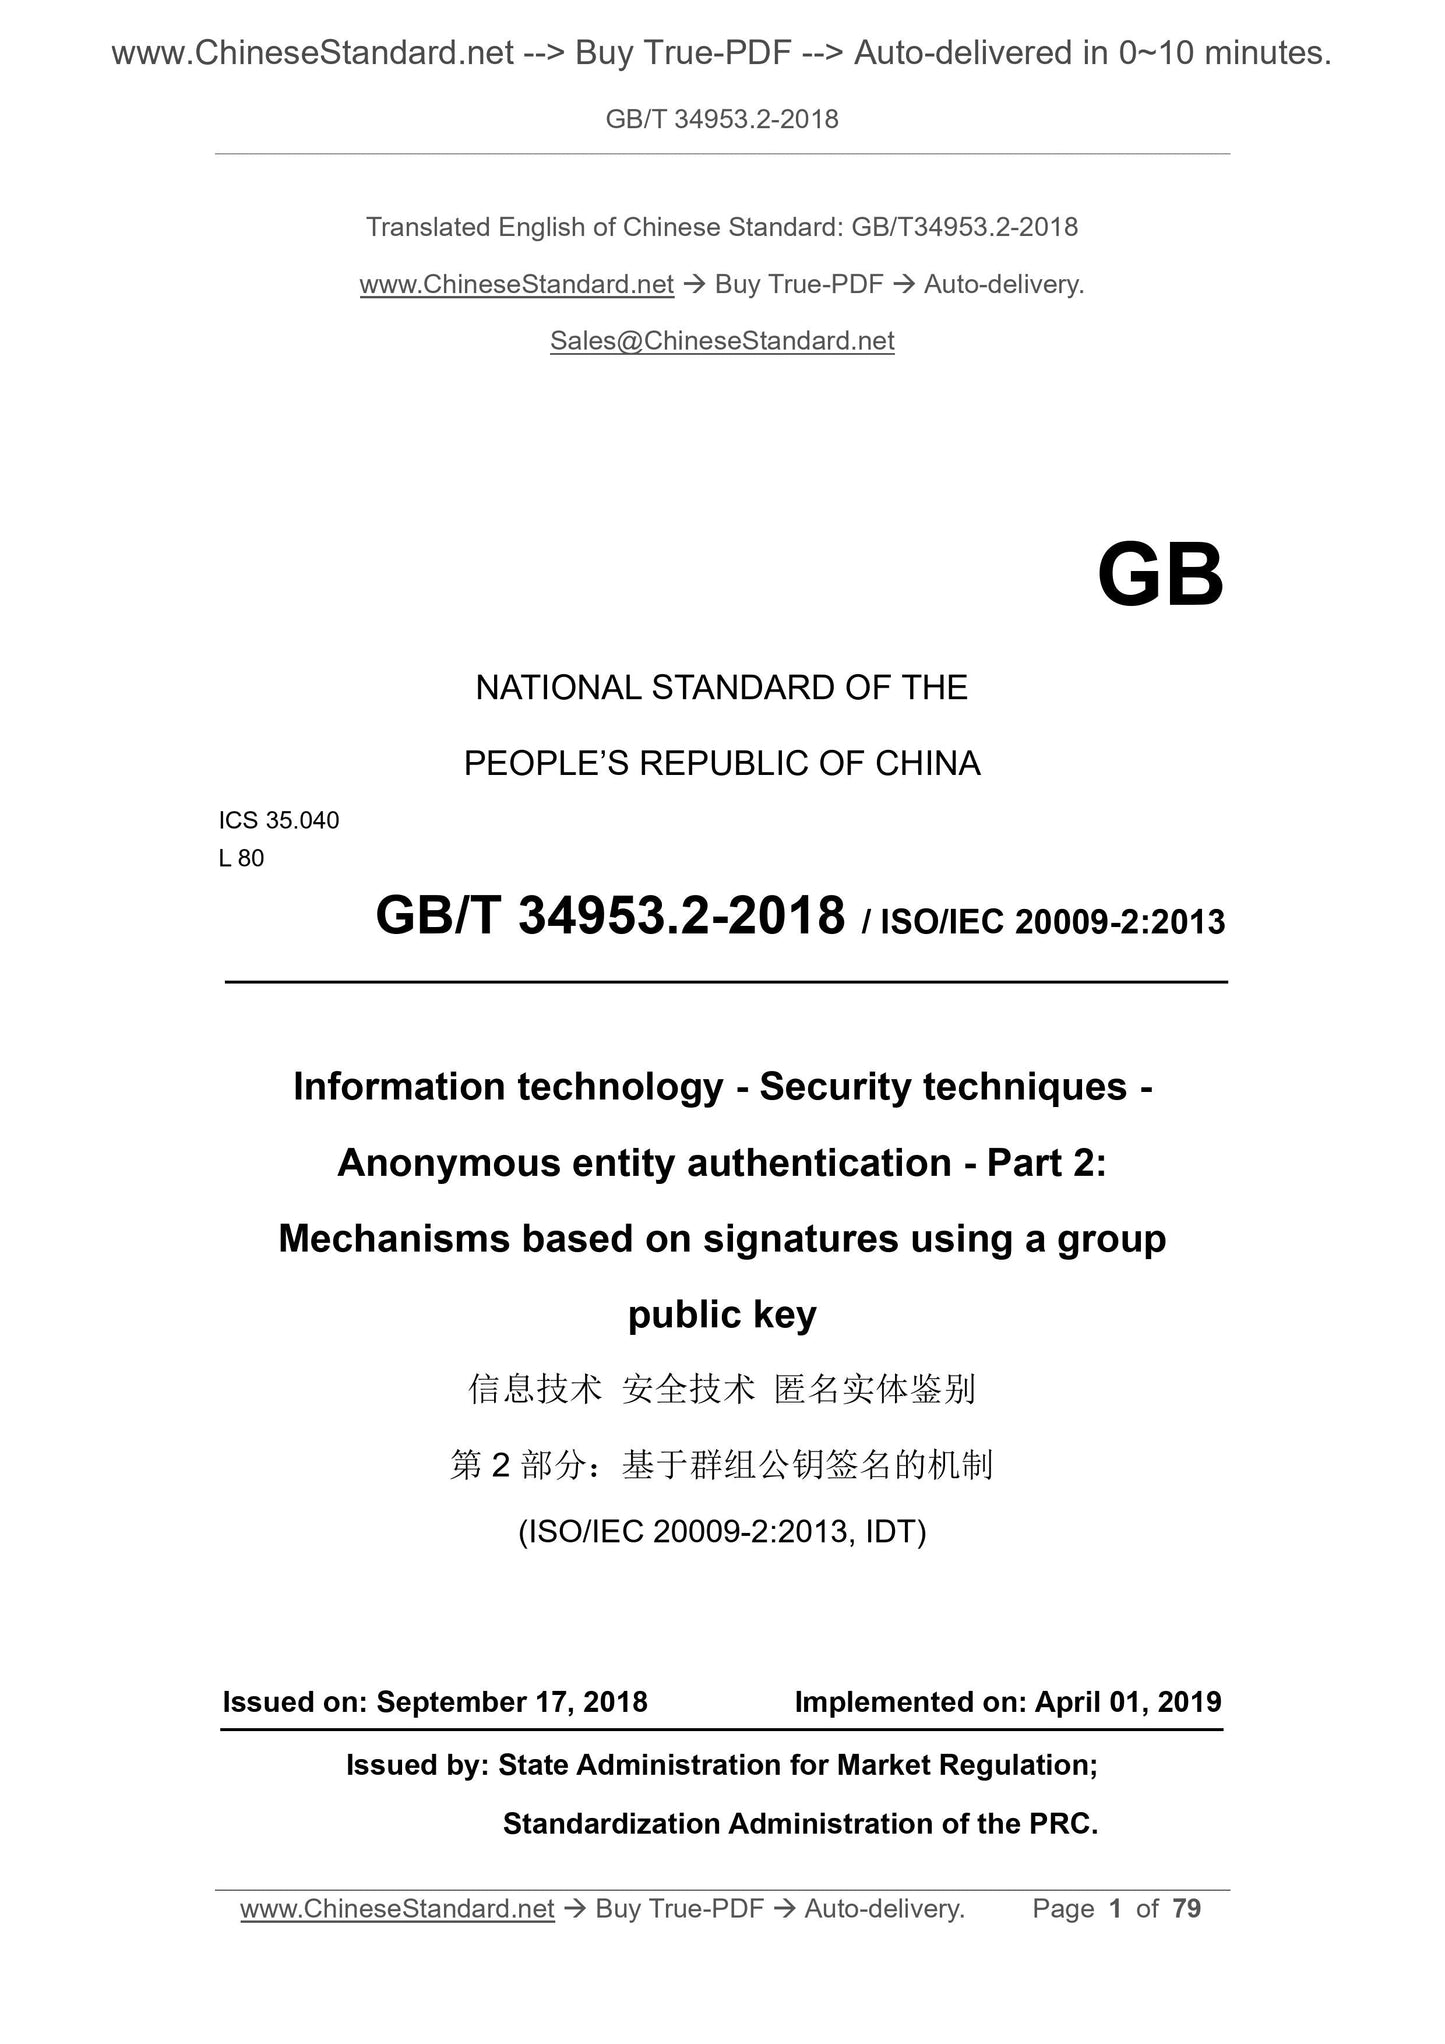 GB/T 34953.2-2018 Page 1